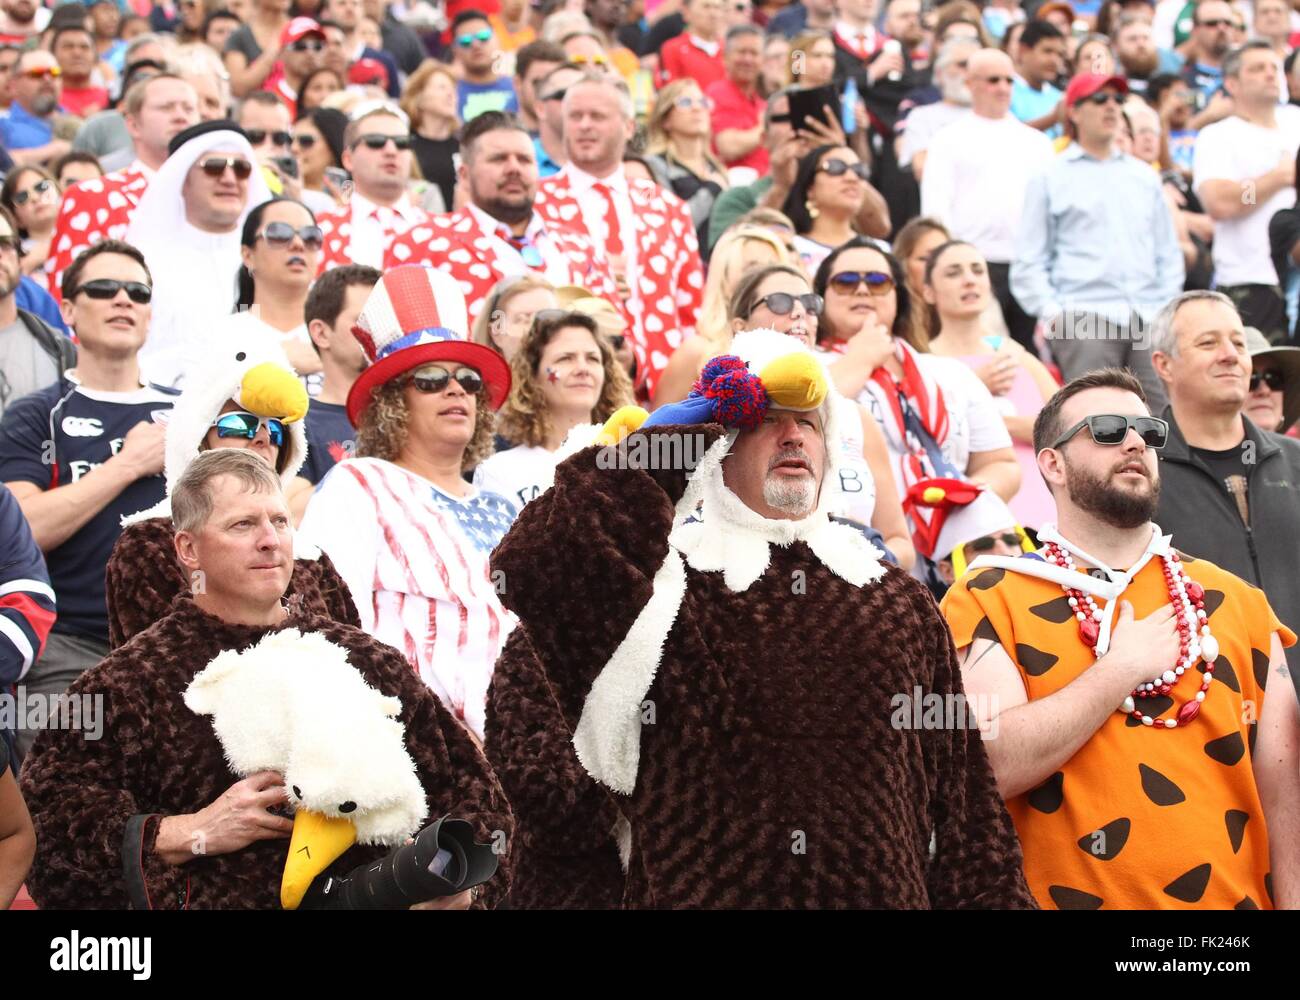 Las Vegas, NV, USA. 5th Mar, 2016. Rugby fans during US national anthem in attendance for USA Sevens International Rugby Tournament - SAT, Sam Boyd Stadium, Las Vegas, NV March 5, 2016. © James Atoa/Everett Collection/Alamy Live News Stock Photo